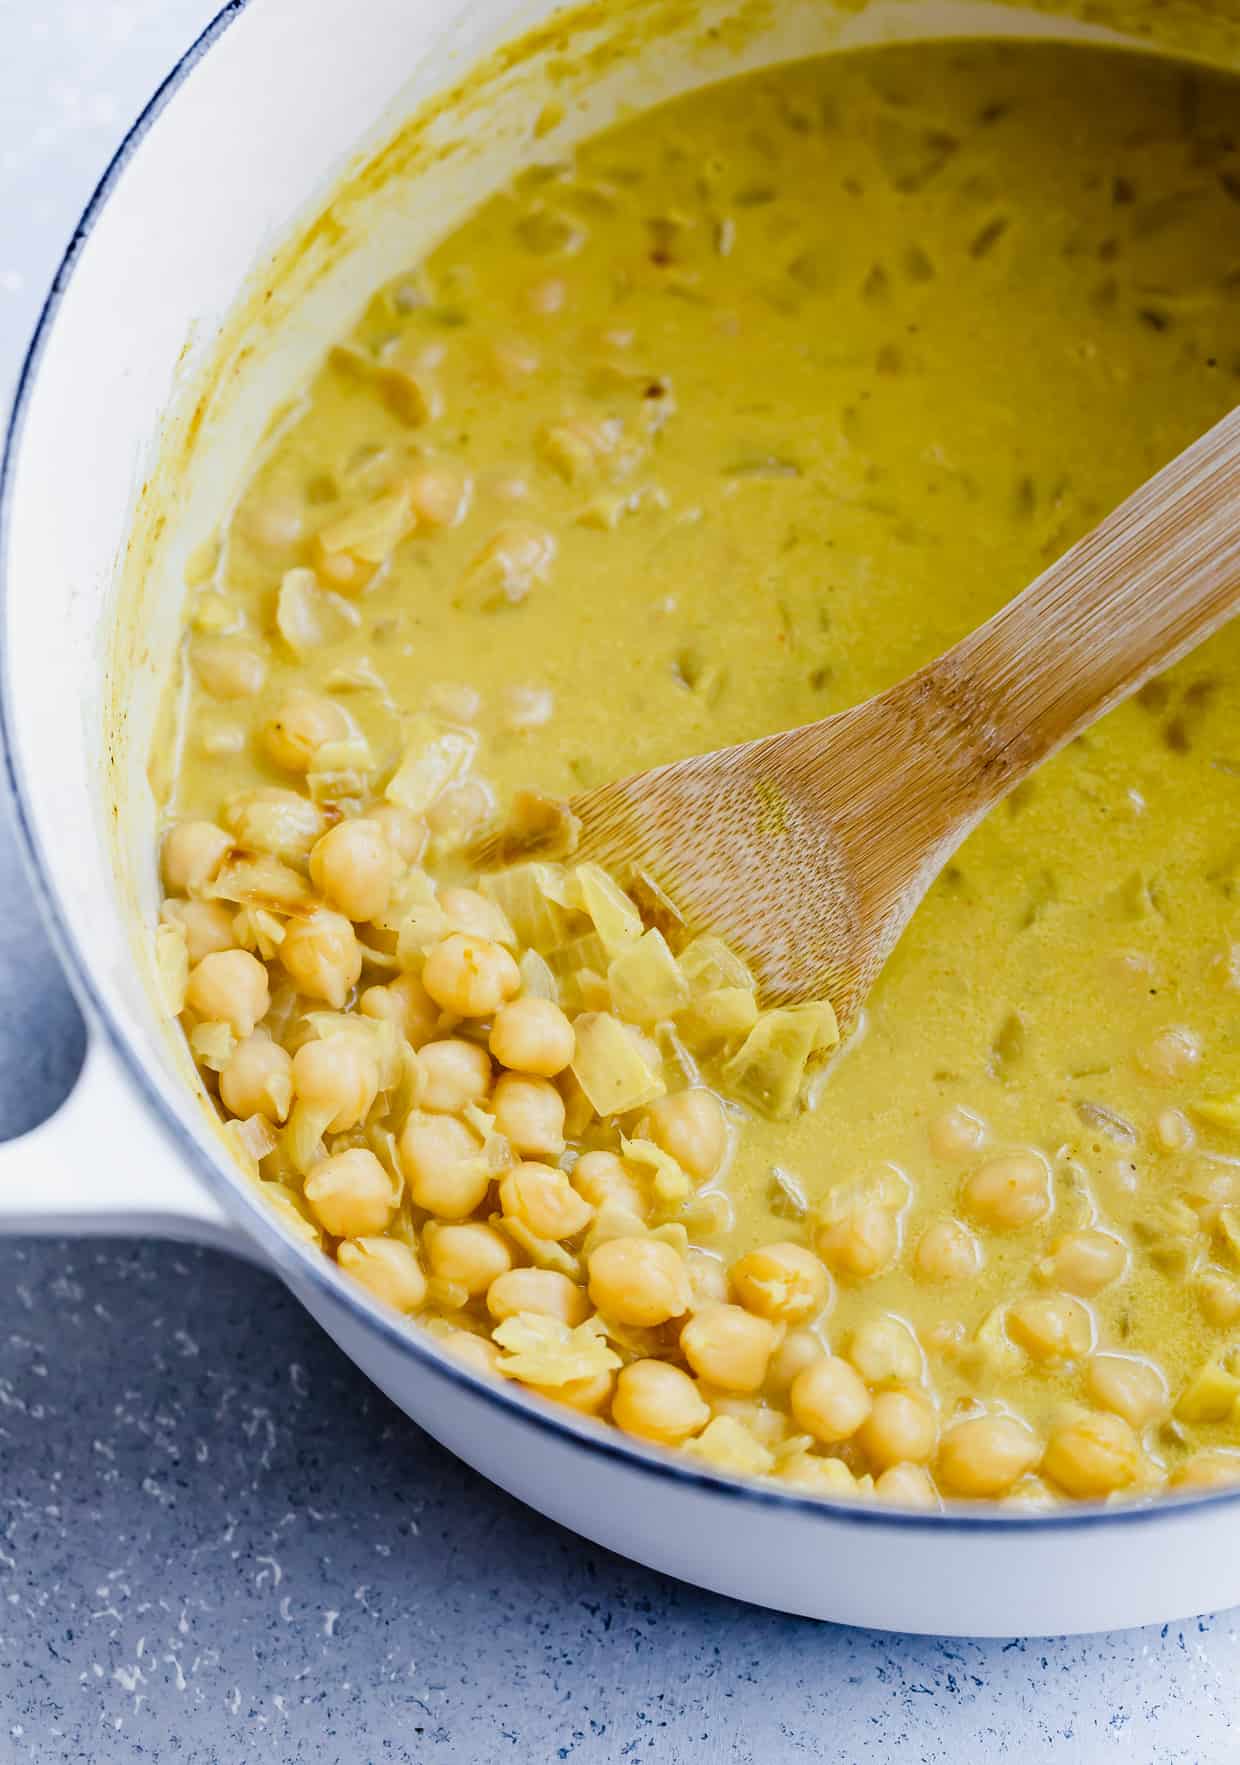 Chickpea curry in a white pot, with a wooden spoon lifting out some chickpeas.